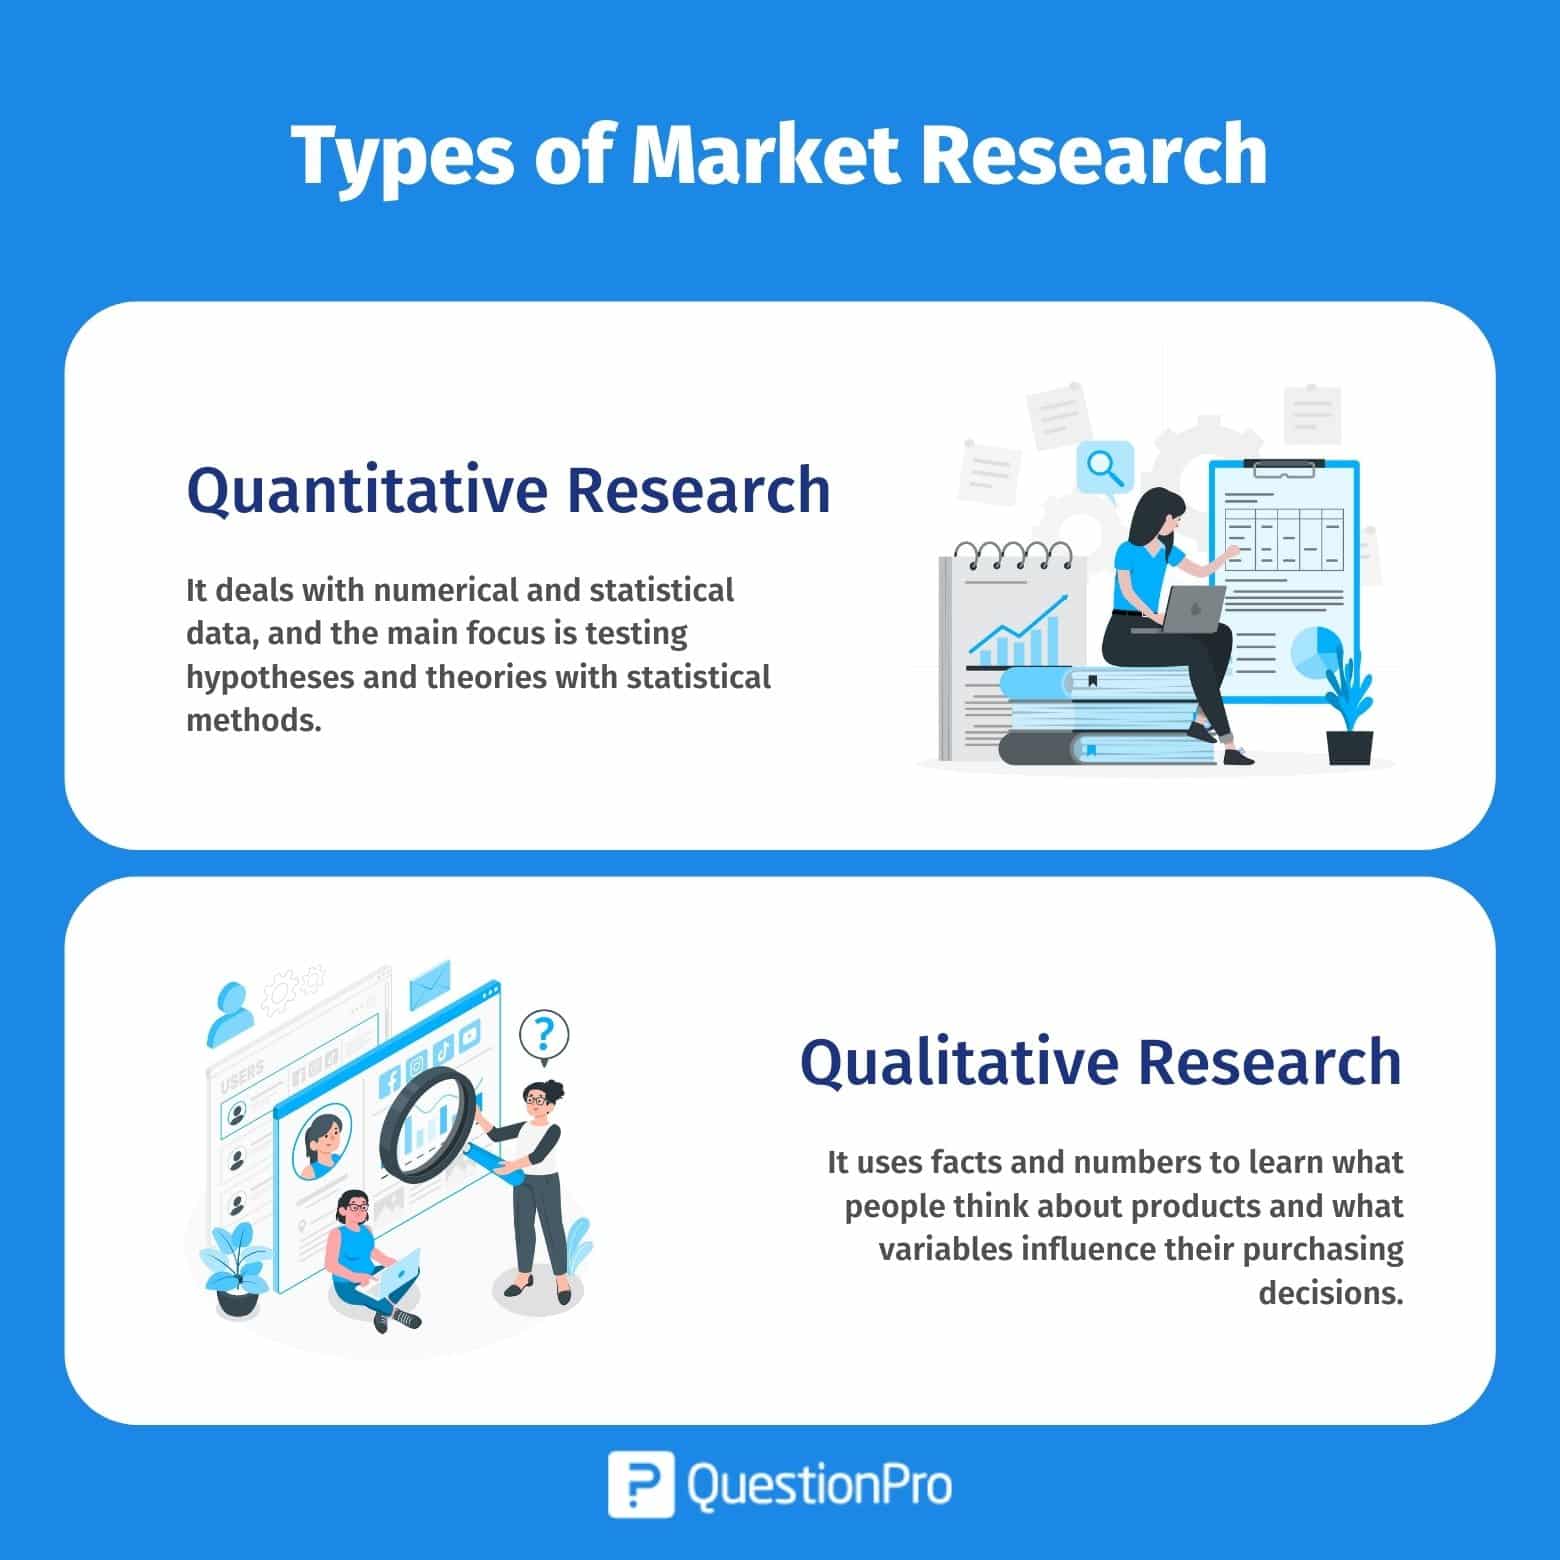 what is market research